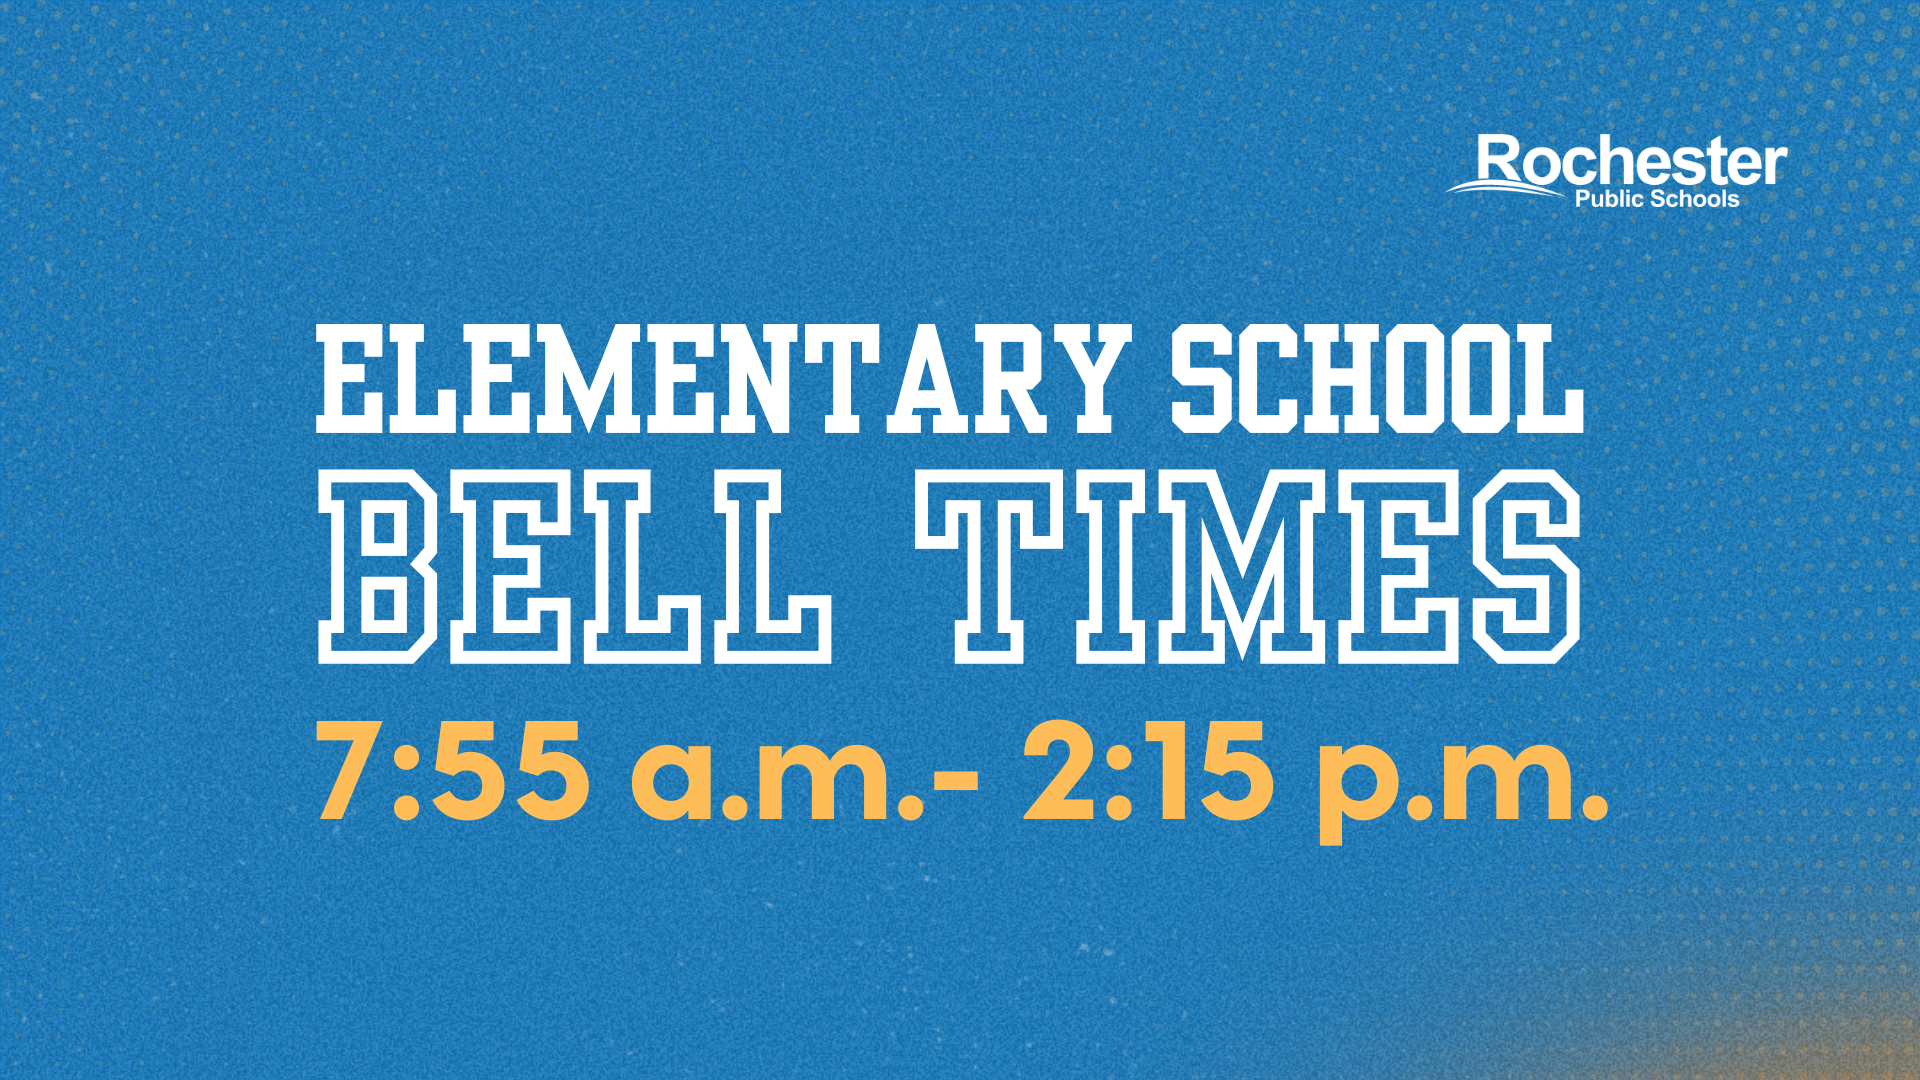 School bell times 7:55 a.m. to 2:15 p.m.